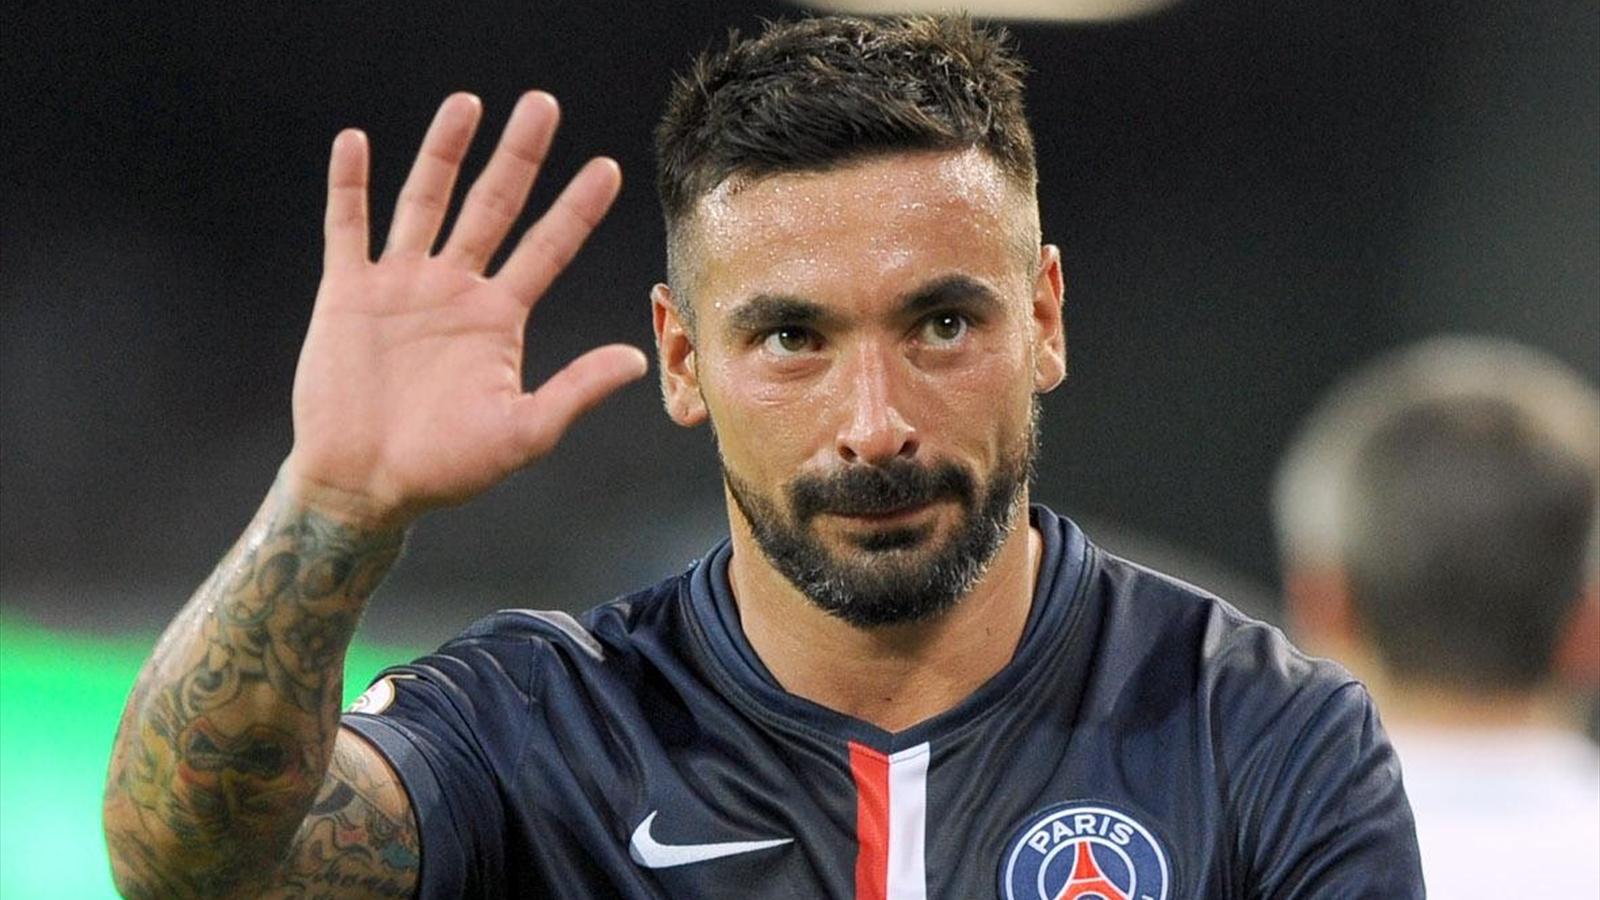 Lavezzi: “Barca is a dream, I will have to choose well”